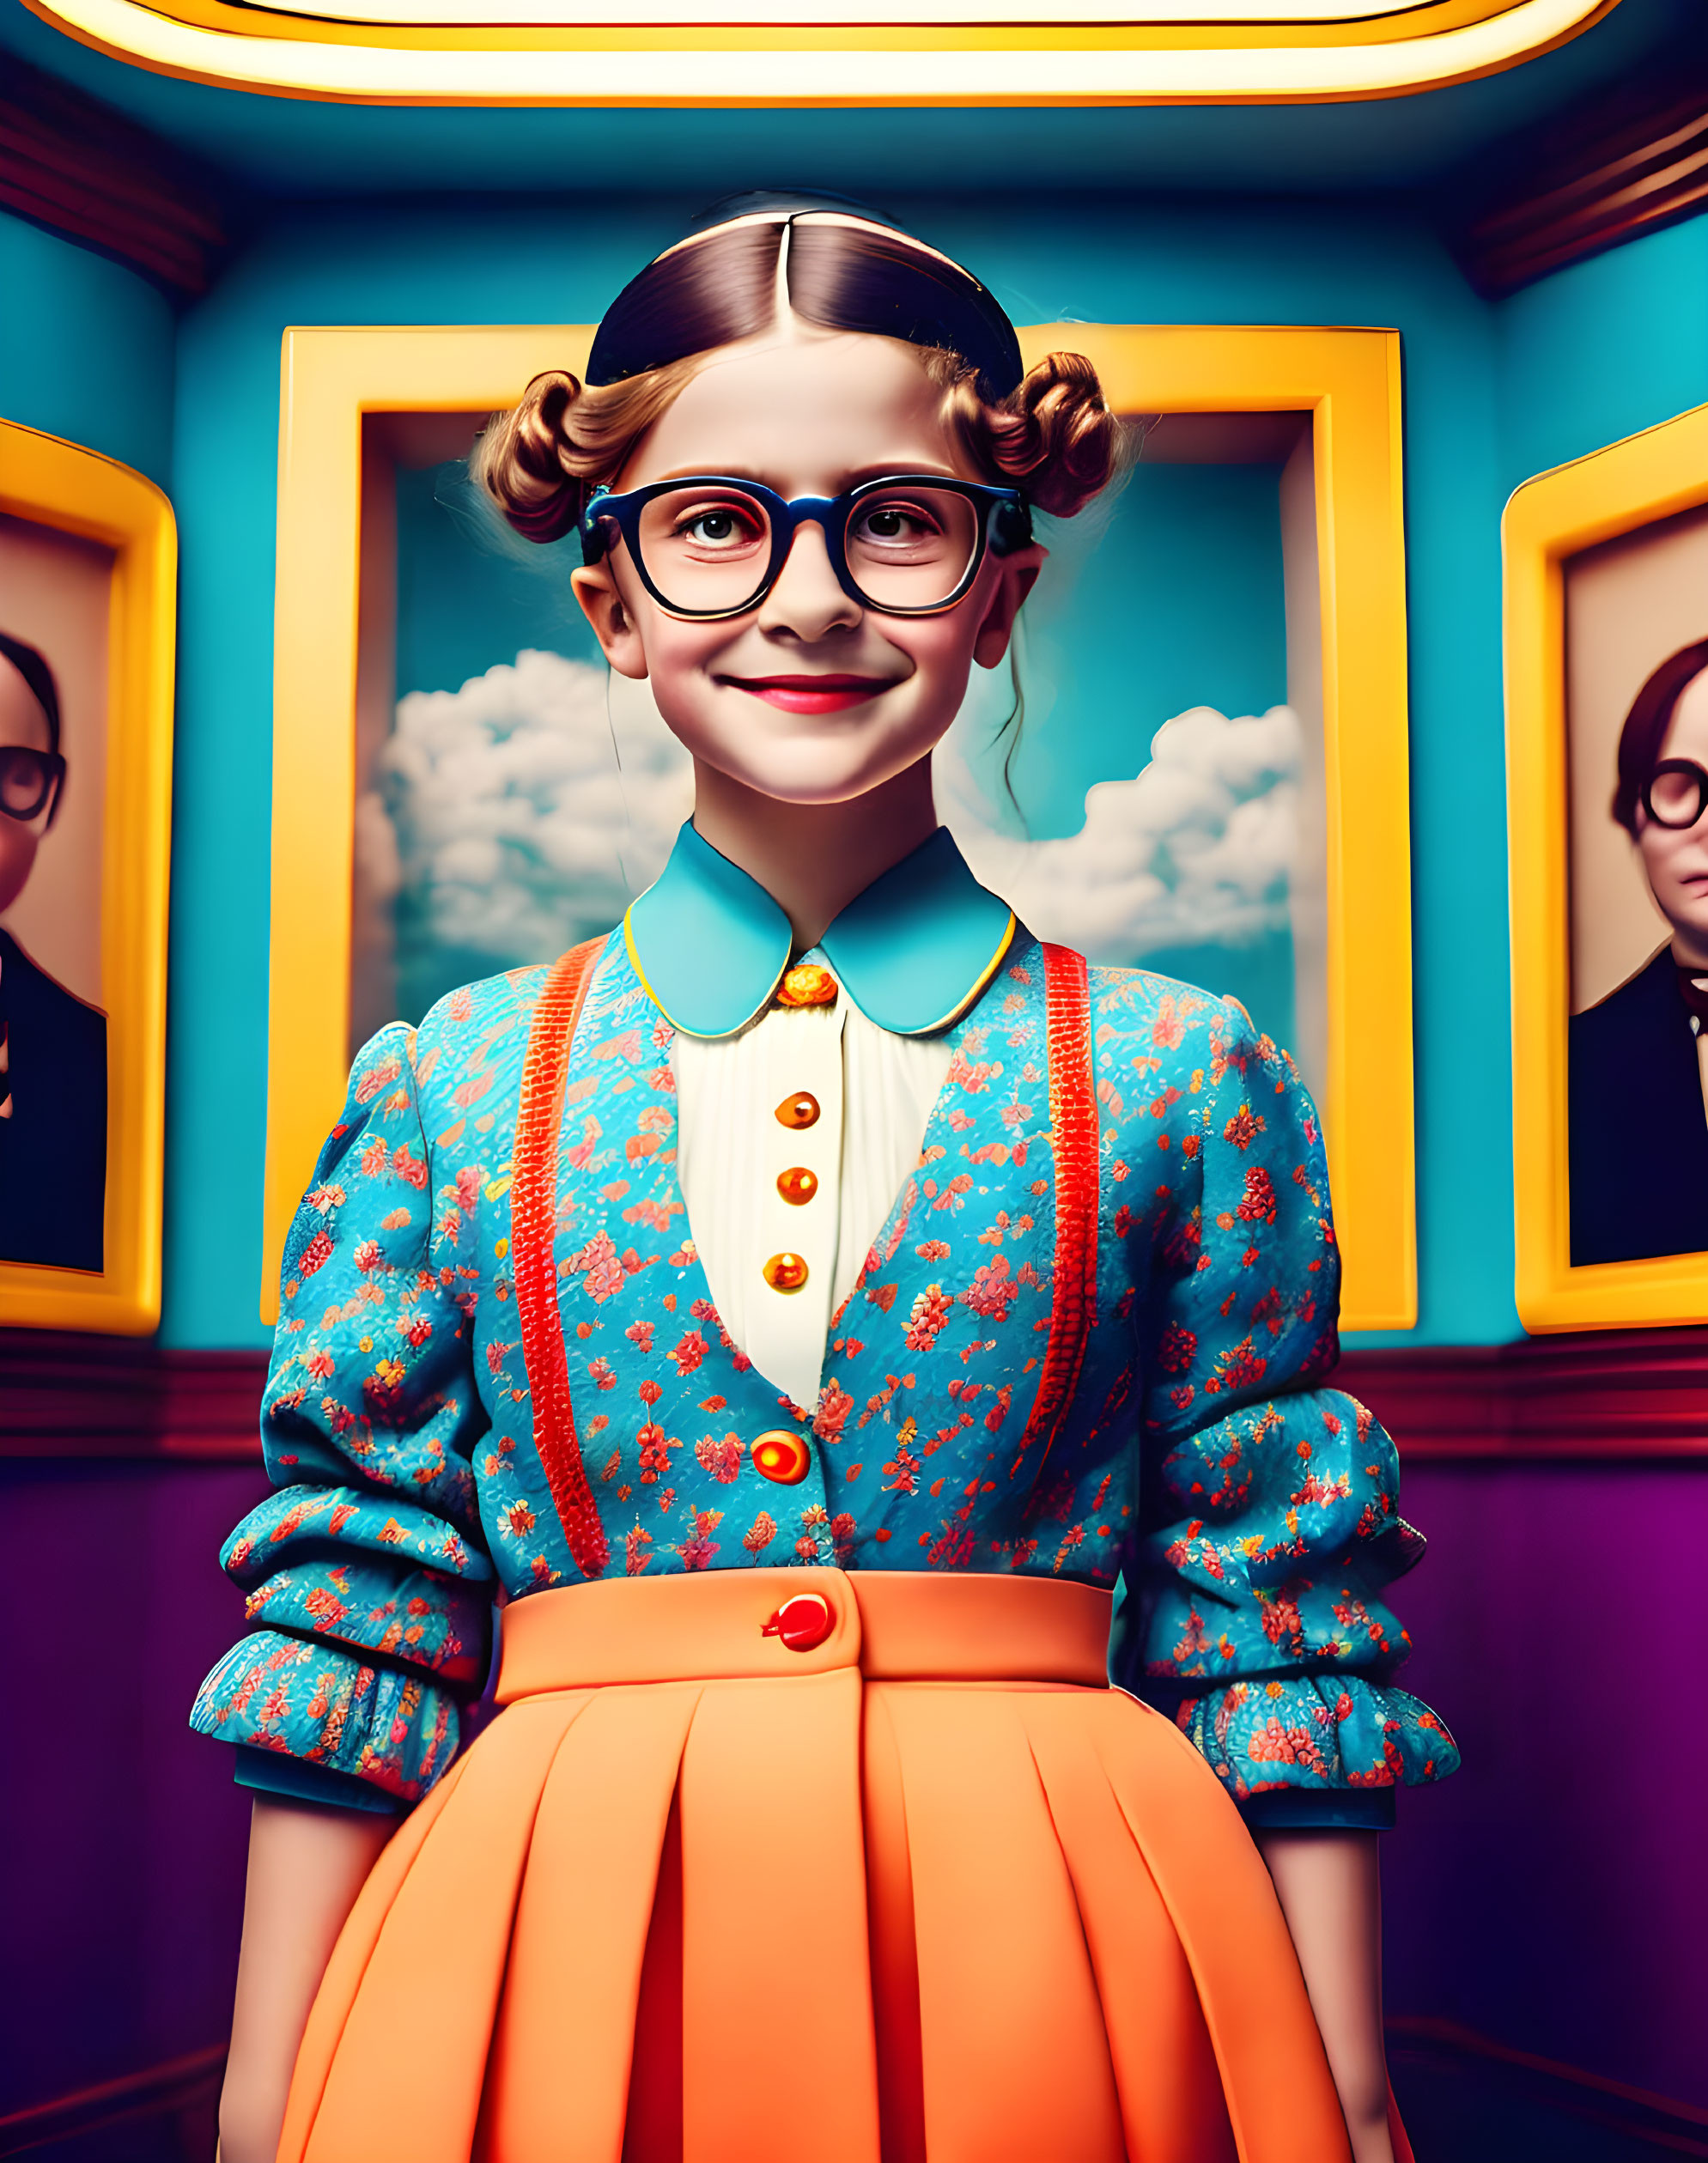 Illustration of smiling girl with glasses and curly hair in colorful dress in room with framed portraits